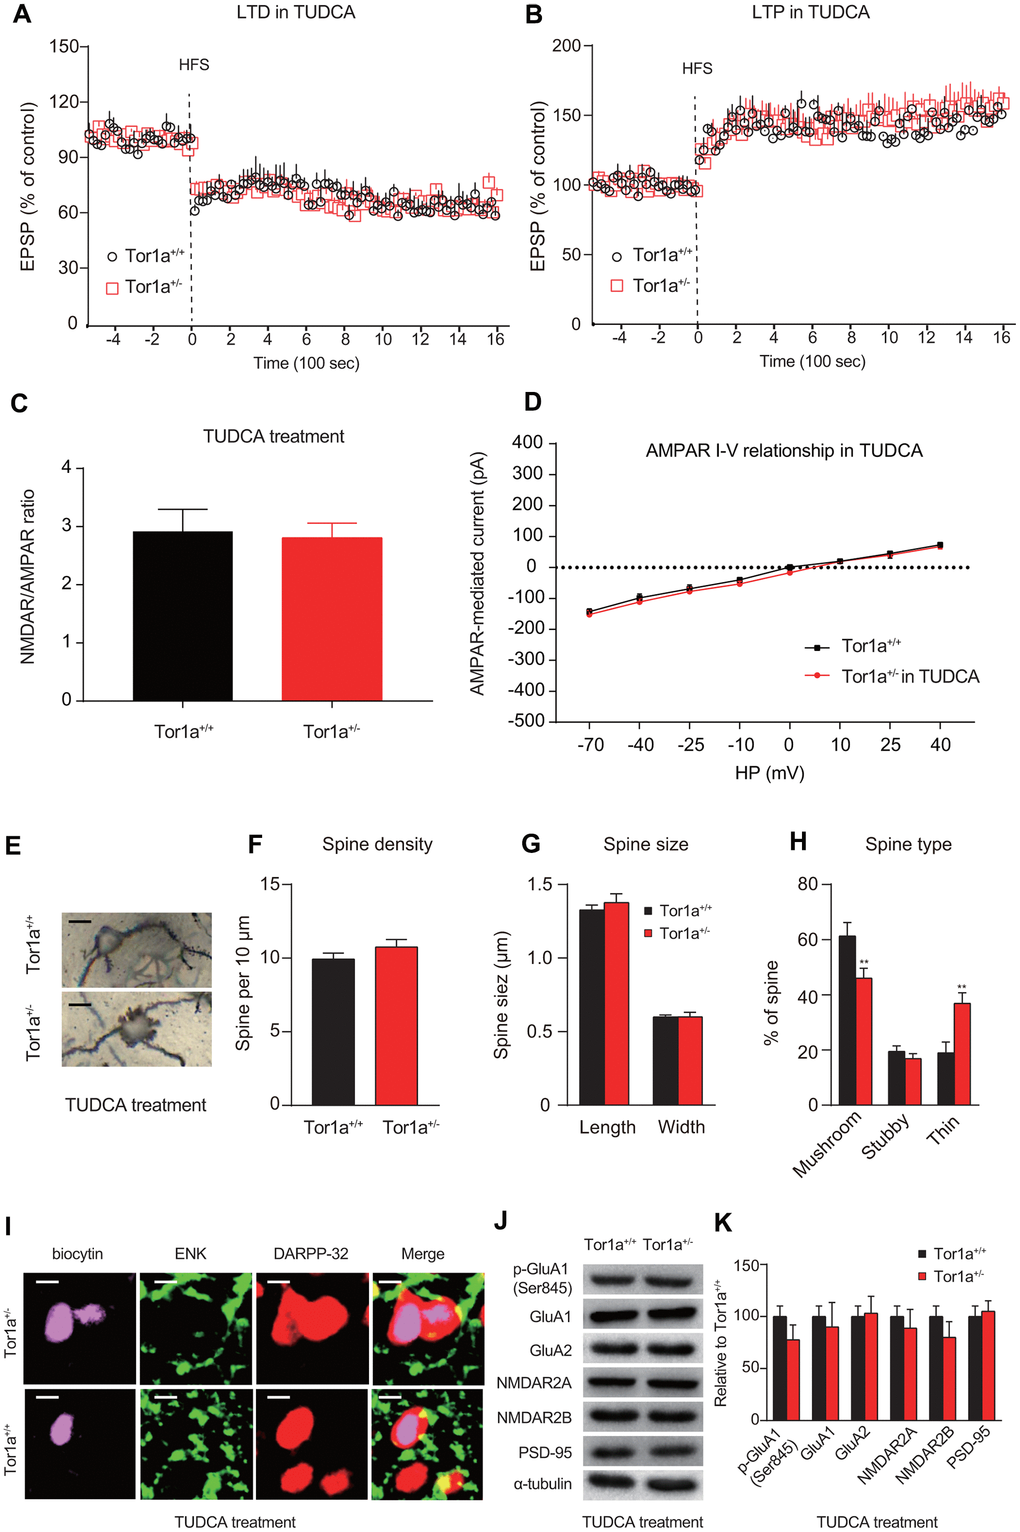 ER stress inhibitor rescues long-term memory deficit in Tor1a+/- mice. (A) Time-course of striatal LTD expression in SPNs from Tor1a+/+ and Tor1a+/- mice. After in vivo treatment with TUDCA, the HFS protocol induced striatal LTD expression in Tor1a+/- mice. (B) Time-course of striatal LTP expression in SPNs from Tor1a+/+ and Tor1a+/- mice. LTP amplitude in Tor1a+/- mice was comparable to that of SPNs from Tor1a+/+ littermates. (C) Summary plot of NMDA/AMPA current ratio calculated in SPNs from Tor1a+/+ and Tor1a+/- mice. treatment with TUDCA normalized the NMDAR/AMPAR ratio in Tor1a+/- mice (P>0.05). (D) AMPAR-mediated currents recorded at different HP in Tor1a+/+ and Tor1a+/- SPNs. The IV curve of AMPAR-EPSC also revealed no significant difference between genotypes (P>0.05). (E) Representative images showed spine morphology of Tor1a+/- and Tor1a+/+ SPNs. (F–H) Histogram representing the quantification of dendritic spine density (F), dendritic spine size (G, spine length and head width) and dendritic spine type (H, mushroom, stubby, thin) in Tor1a+/- and Tor1a+/+ SPNs. (I) Representative confocal images from two SPNs recorded in Tor1a+/- and Tor1a+/+ slices after treatment of TUDCA (scale bar: 10 μm). Recording electrodes were filled with biocytin (pink) and SPNs were immunolabelled with anti-ENK (green) and anti-DARPP-32 (red). (J) WB analysis for p-GluA1 (Ser845), GluA1, GluA2, NMDAR2A, NMDAR2B, PSD-95 and α-tubulin in striatum tissues of Tor1a+/- and age-matched Tor1a+/+ mice after treatment of TUDCA. (K) Histogram shows the quantification of protein levels following normalization on α-tubulin in Tor1a+/- and age-matched Tor1a+/+ mice. In each group, five mice were used (N=5), and three independent electrophysiological recordings or experiments were conducted for each mouse (n=3). P